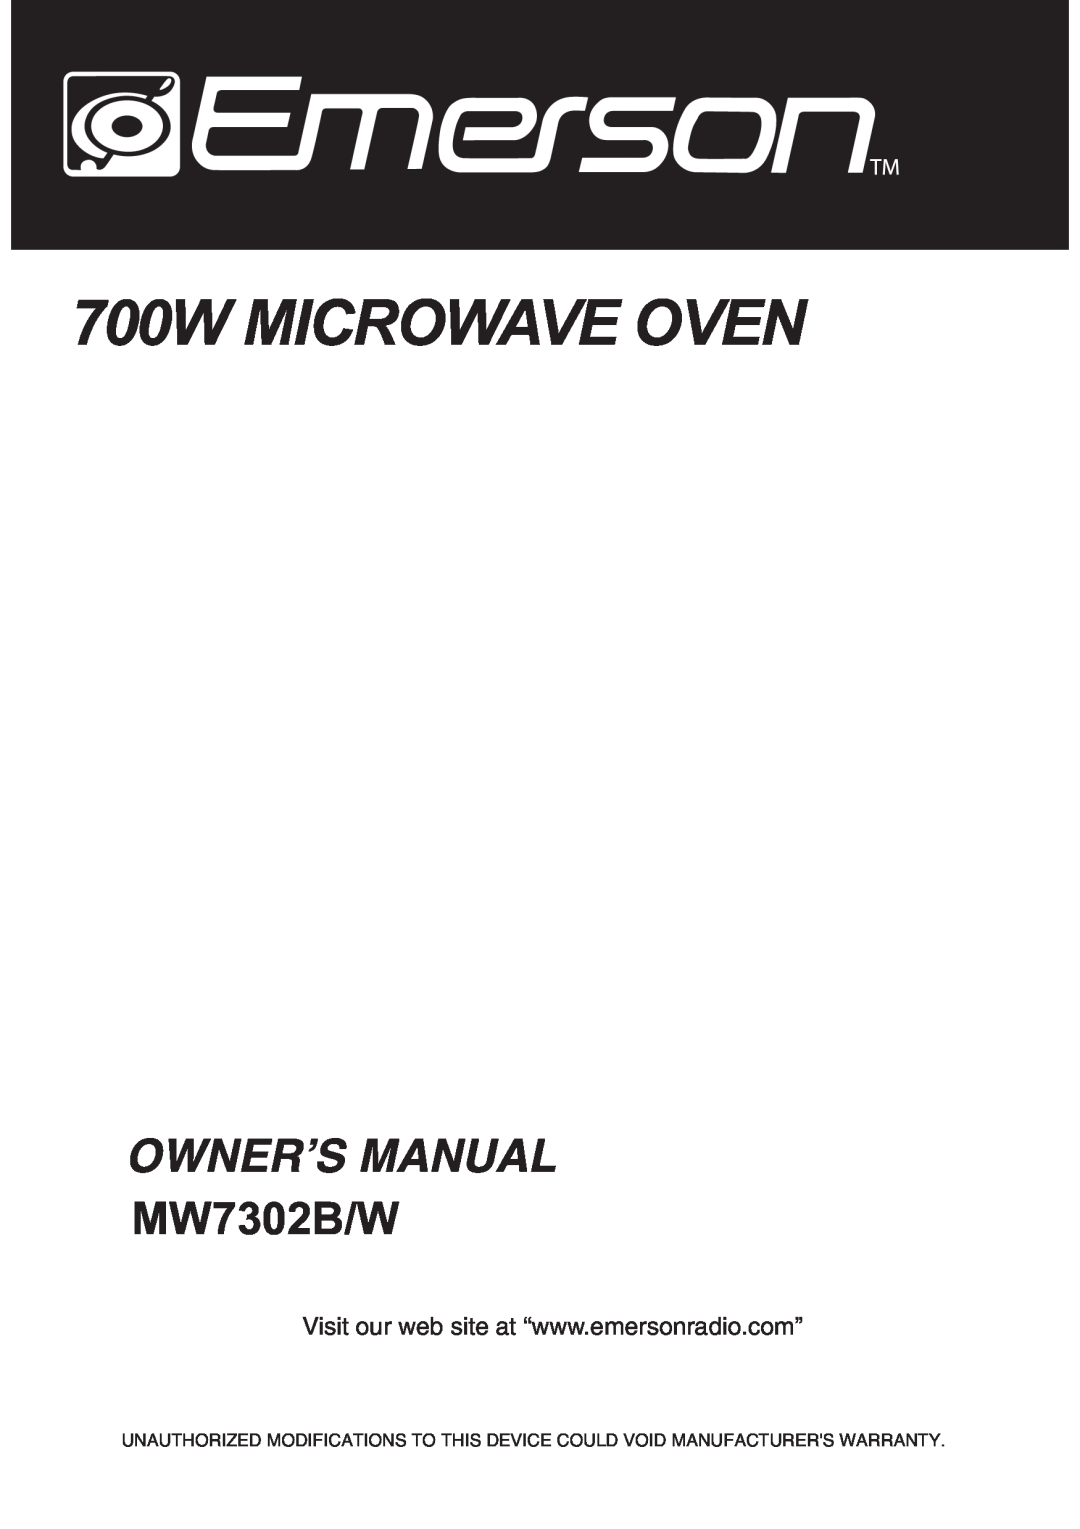 Emerson MW7302W owner manual 700W MICROWAVE OVEN, Owner’S Manual, MW7302B/W 